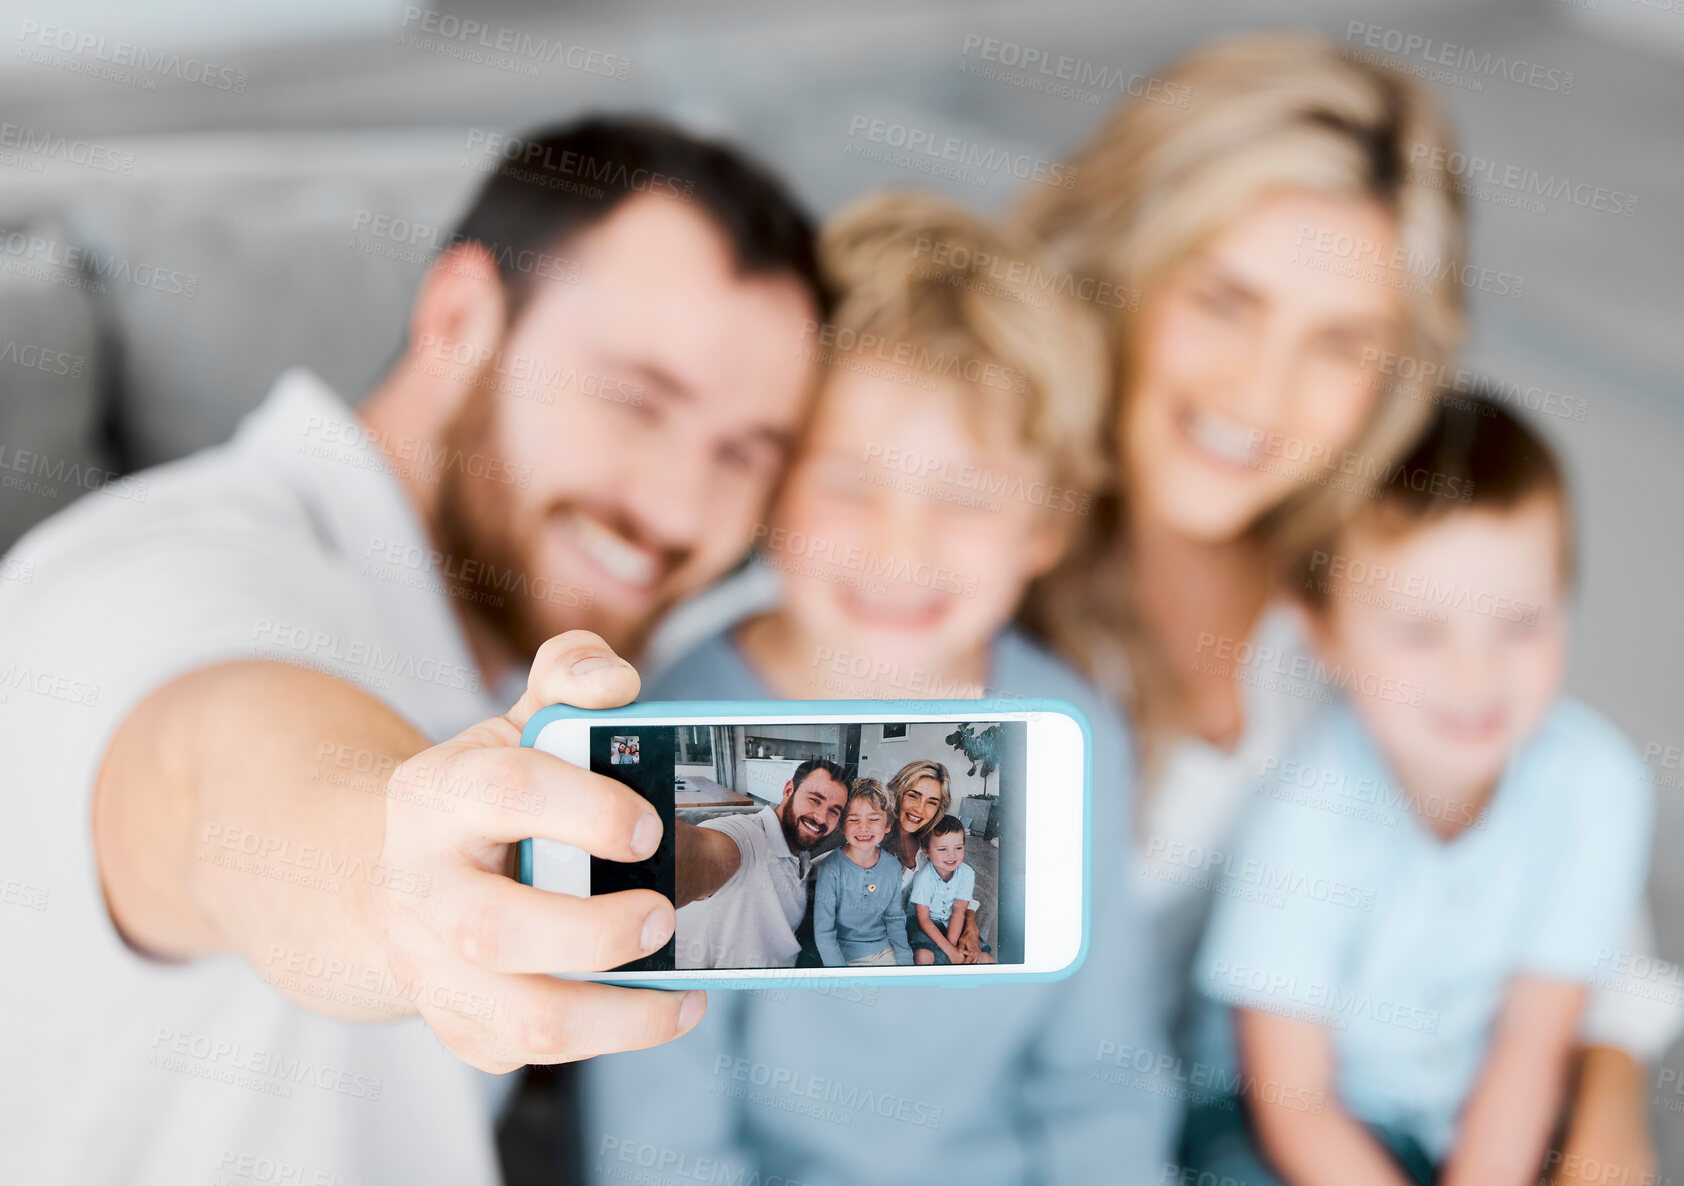 Buy stock photo Closeup of cellphone screen showing happy caucasian family taking selfies at home. Loving parents capturing photos and pictures for special childhood memories while bonding with carefree smiling sons